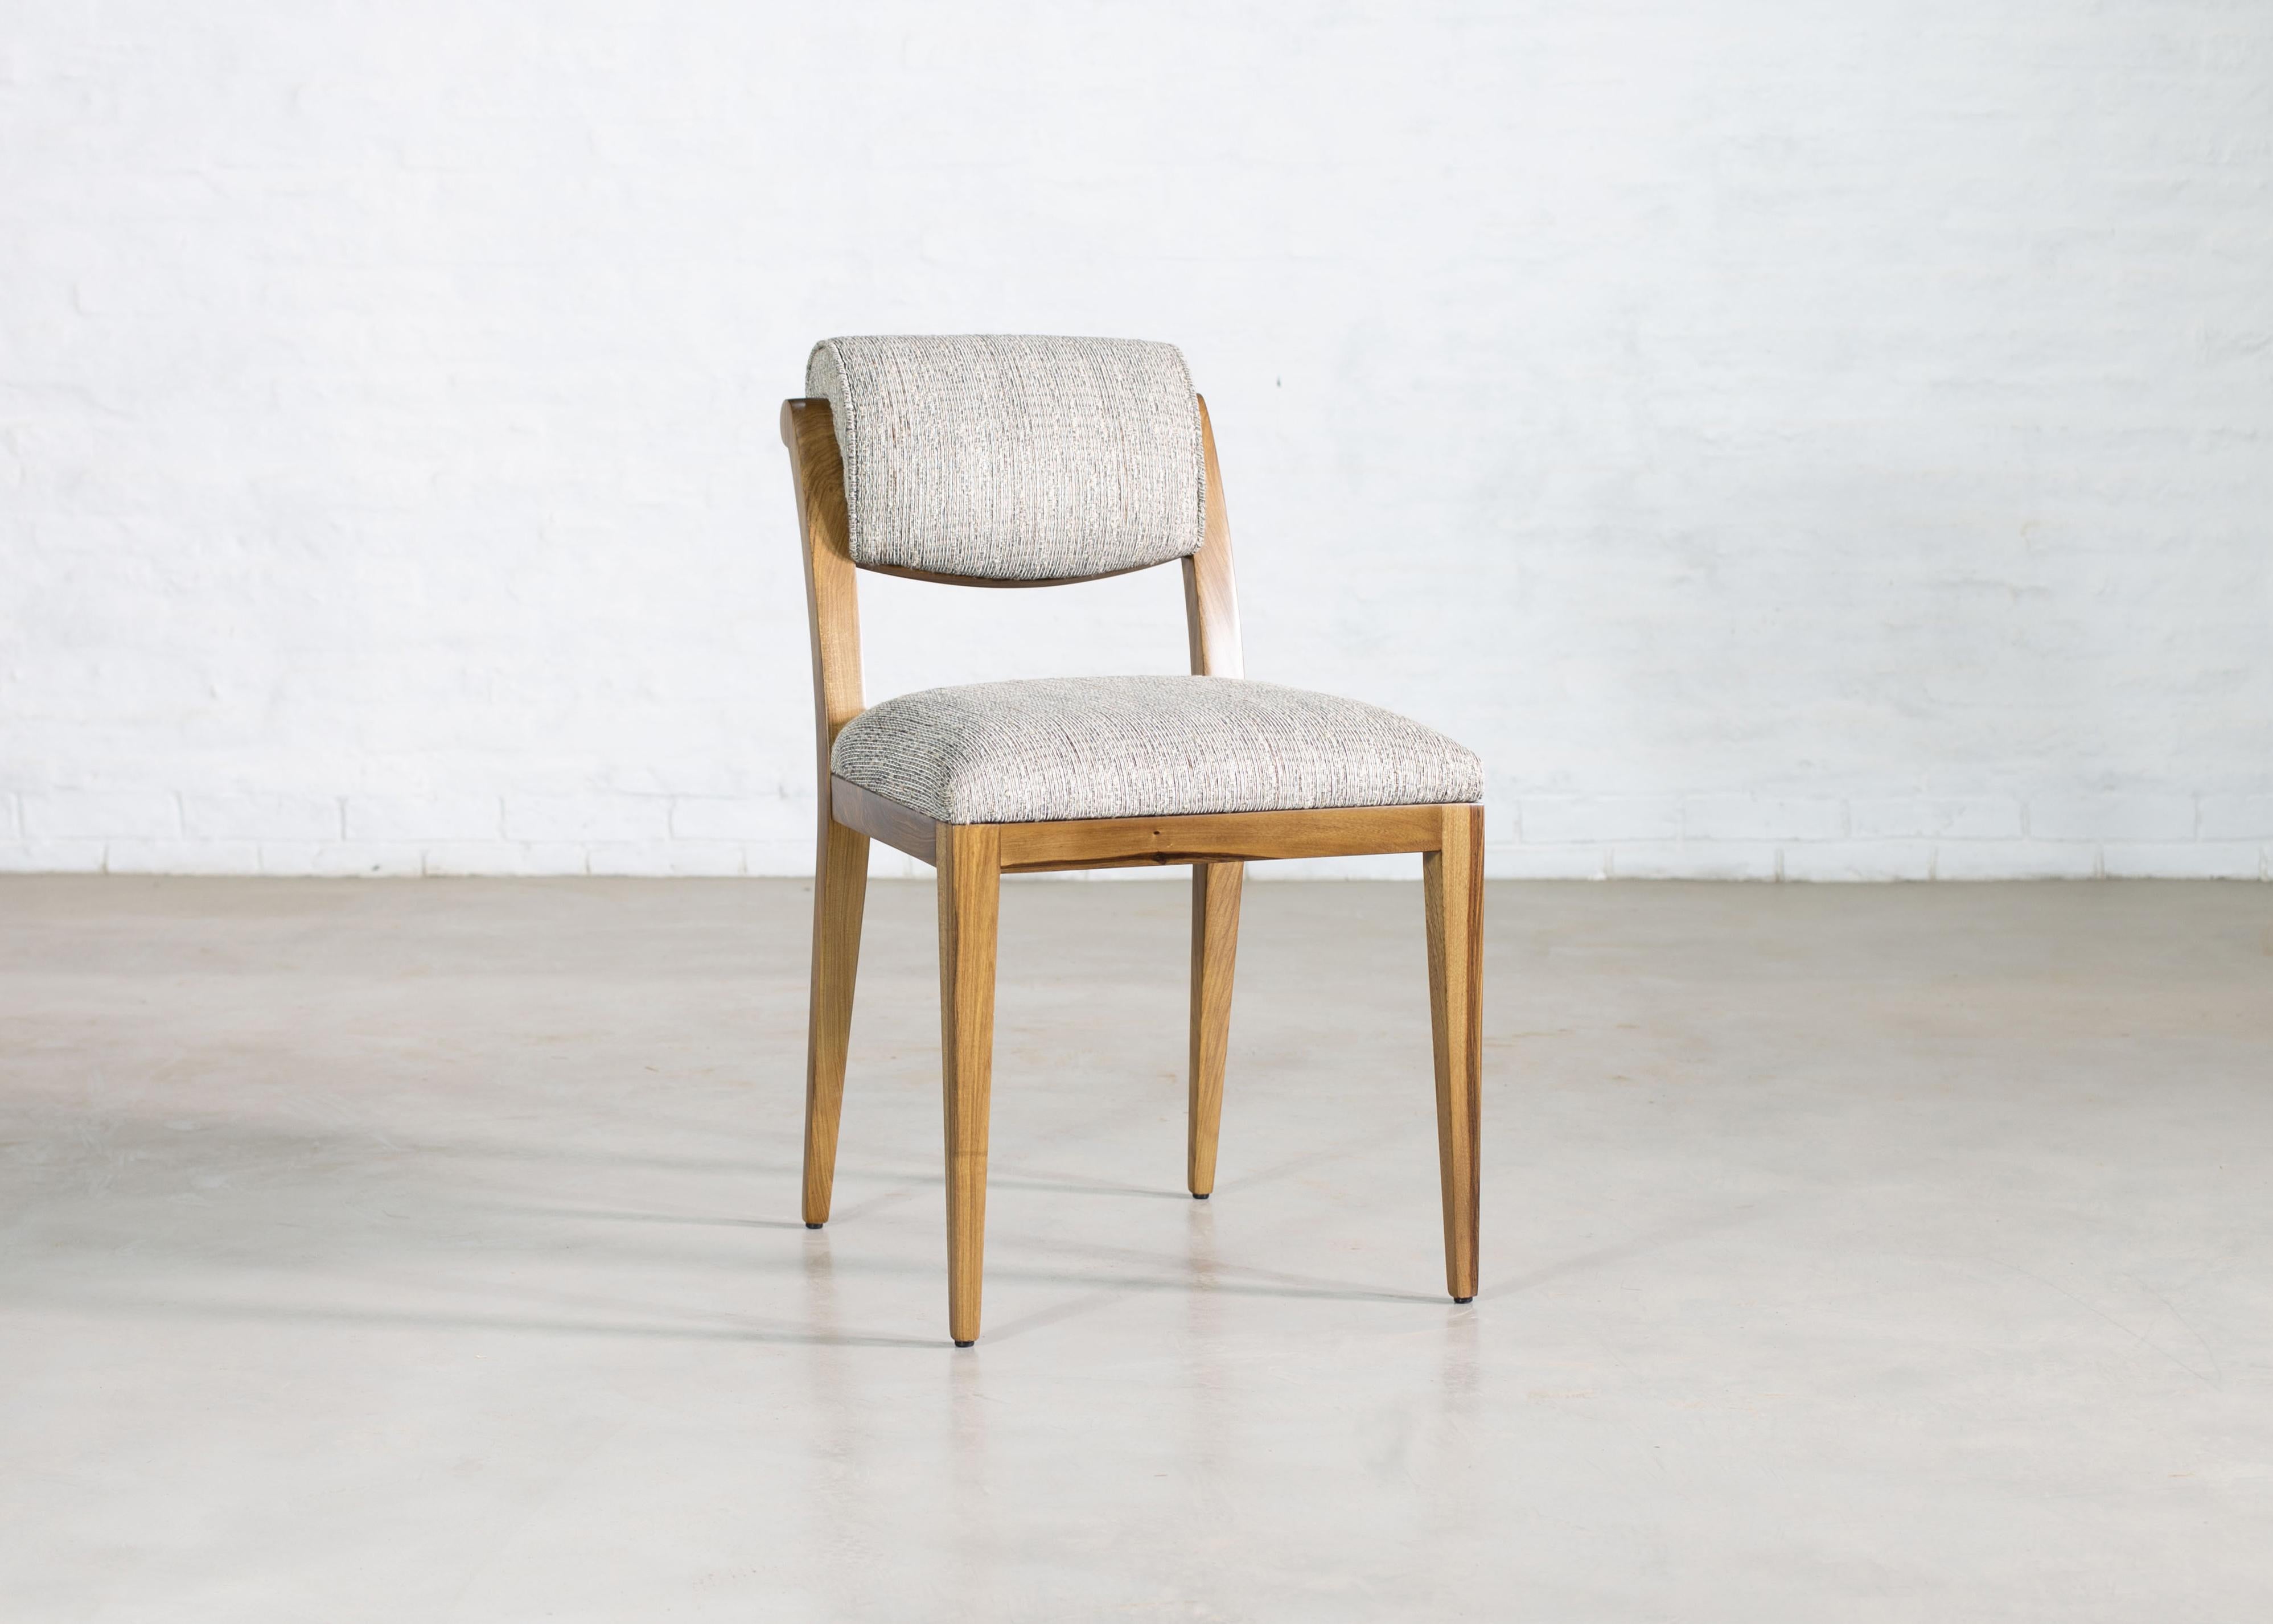 Costantini prides itself in using the hardest and most beautiful hardwoods in the construction of its line of seating. The Gianni dining chair borrows cues from the early 20th century Art Deco masters and features a light frame with a scrolled back.